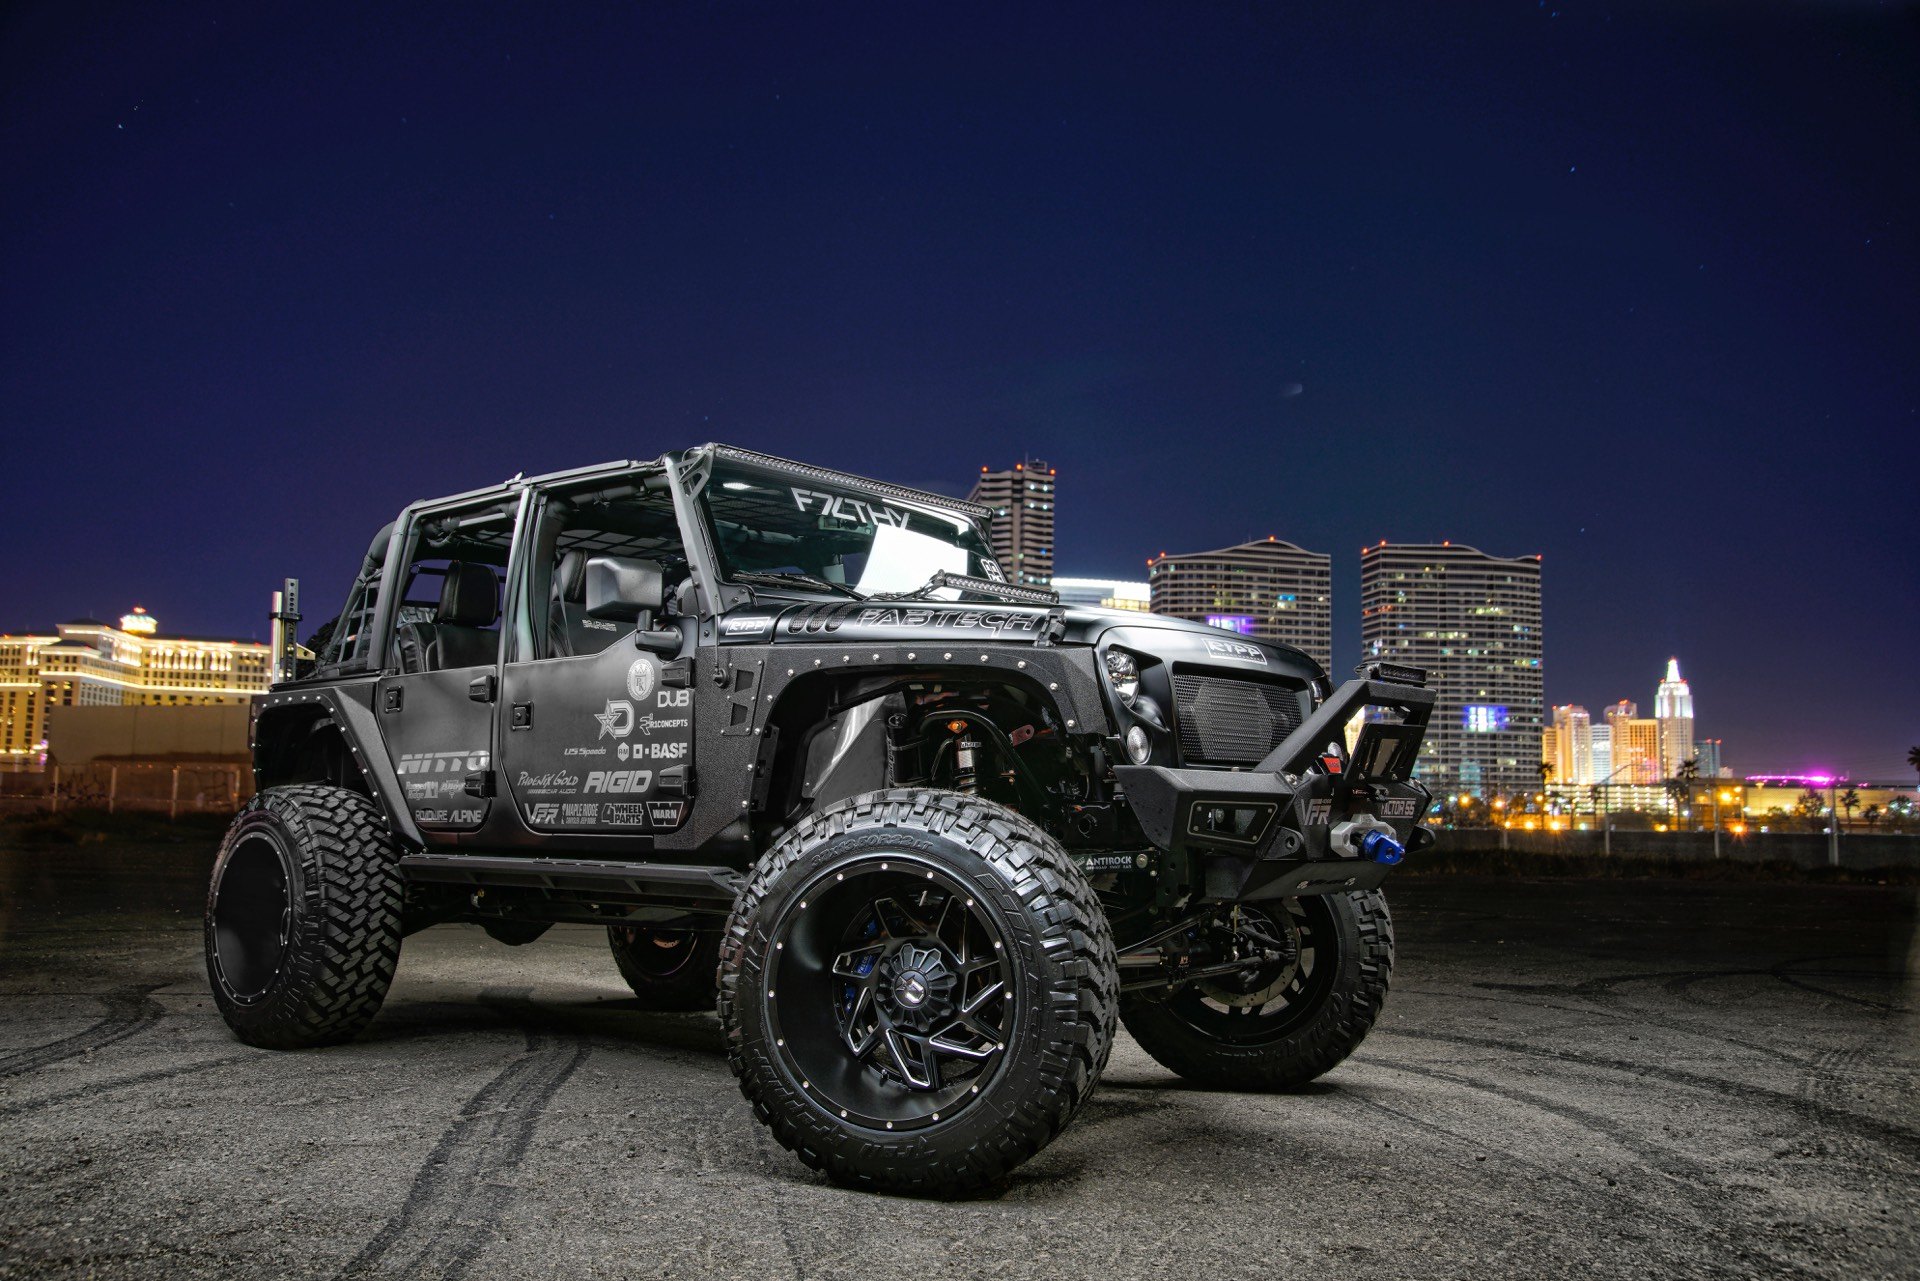 Custom Lifted Jeep Wrangler Unlimited with Nitto Tires - Photo by Dropstar